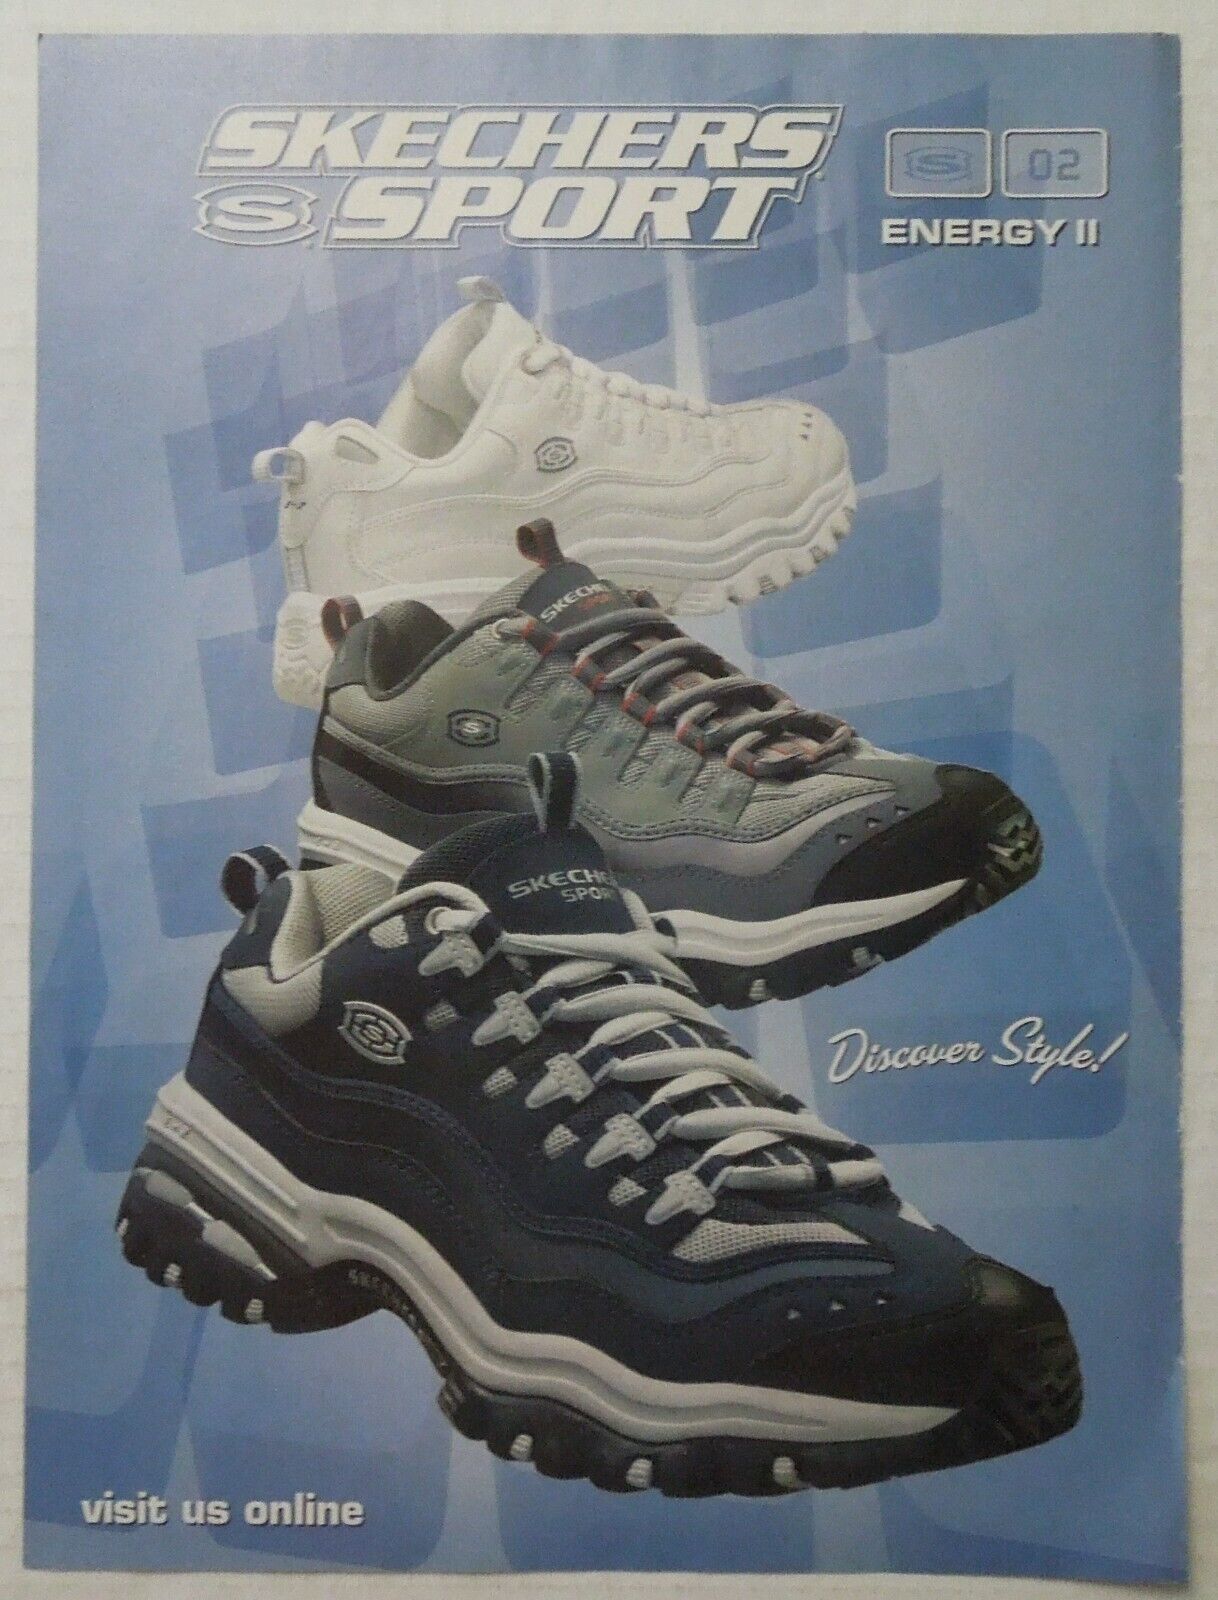 2002 SKECHERS SPORT Energy II Shoes Magazine Ad - Discover Style